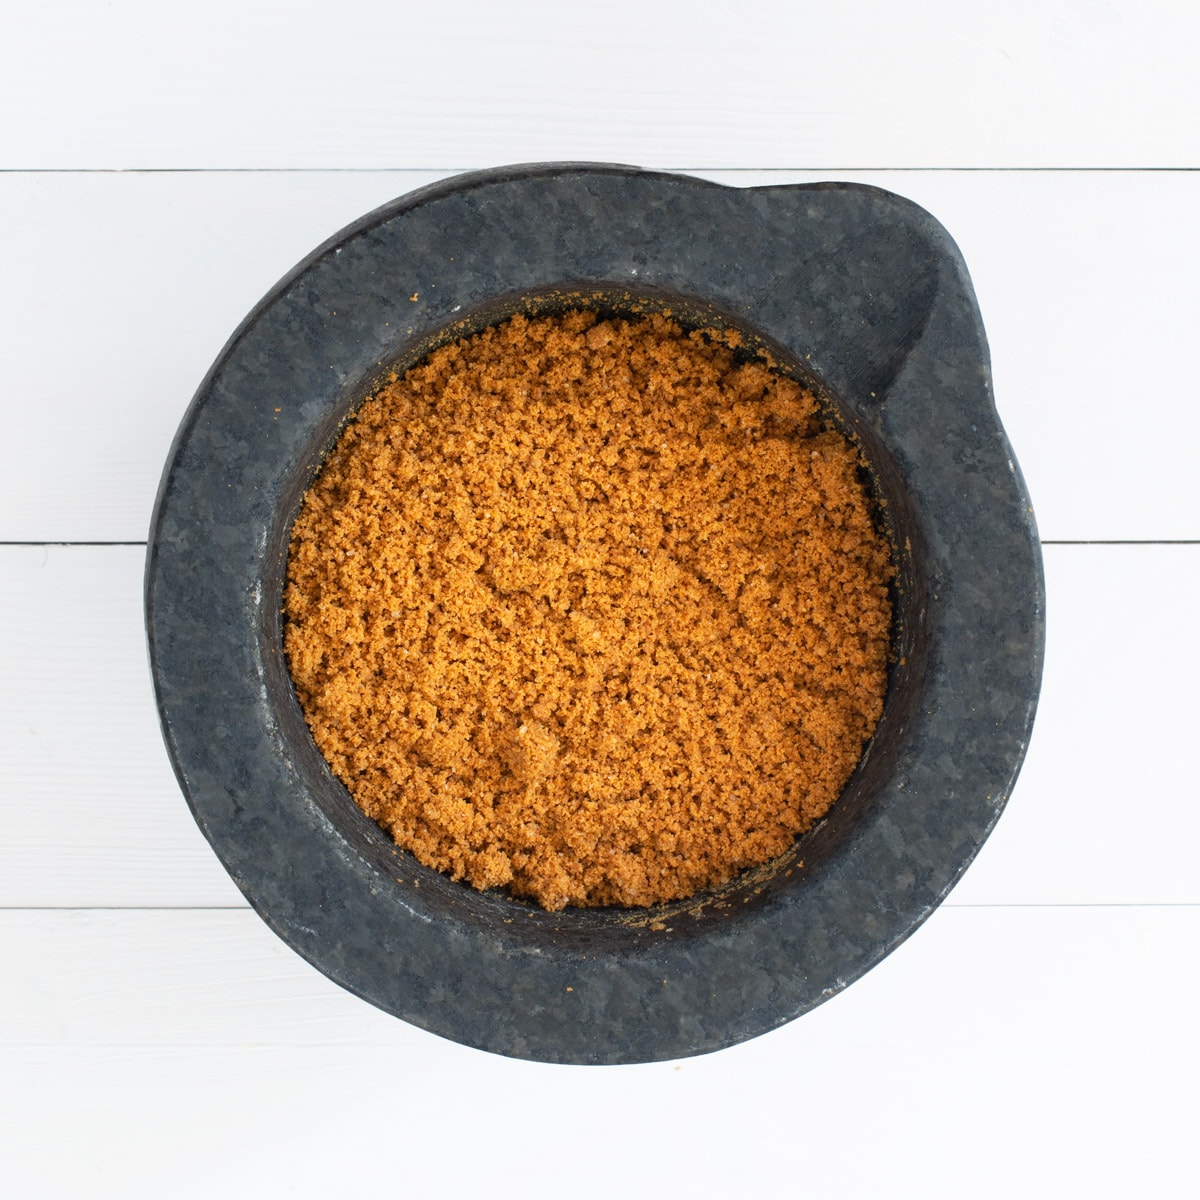 Finely ground Lotus Biscoff Biscuits in a mortar (stone grinding bowl)